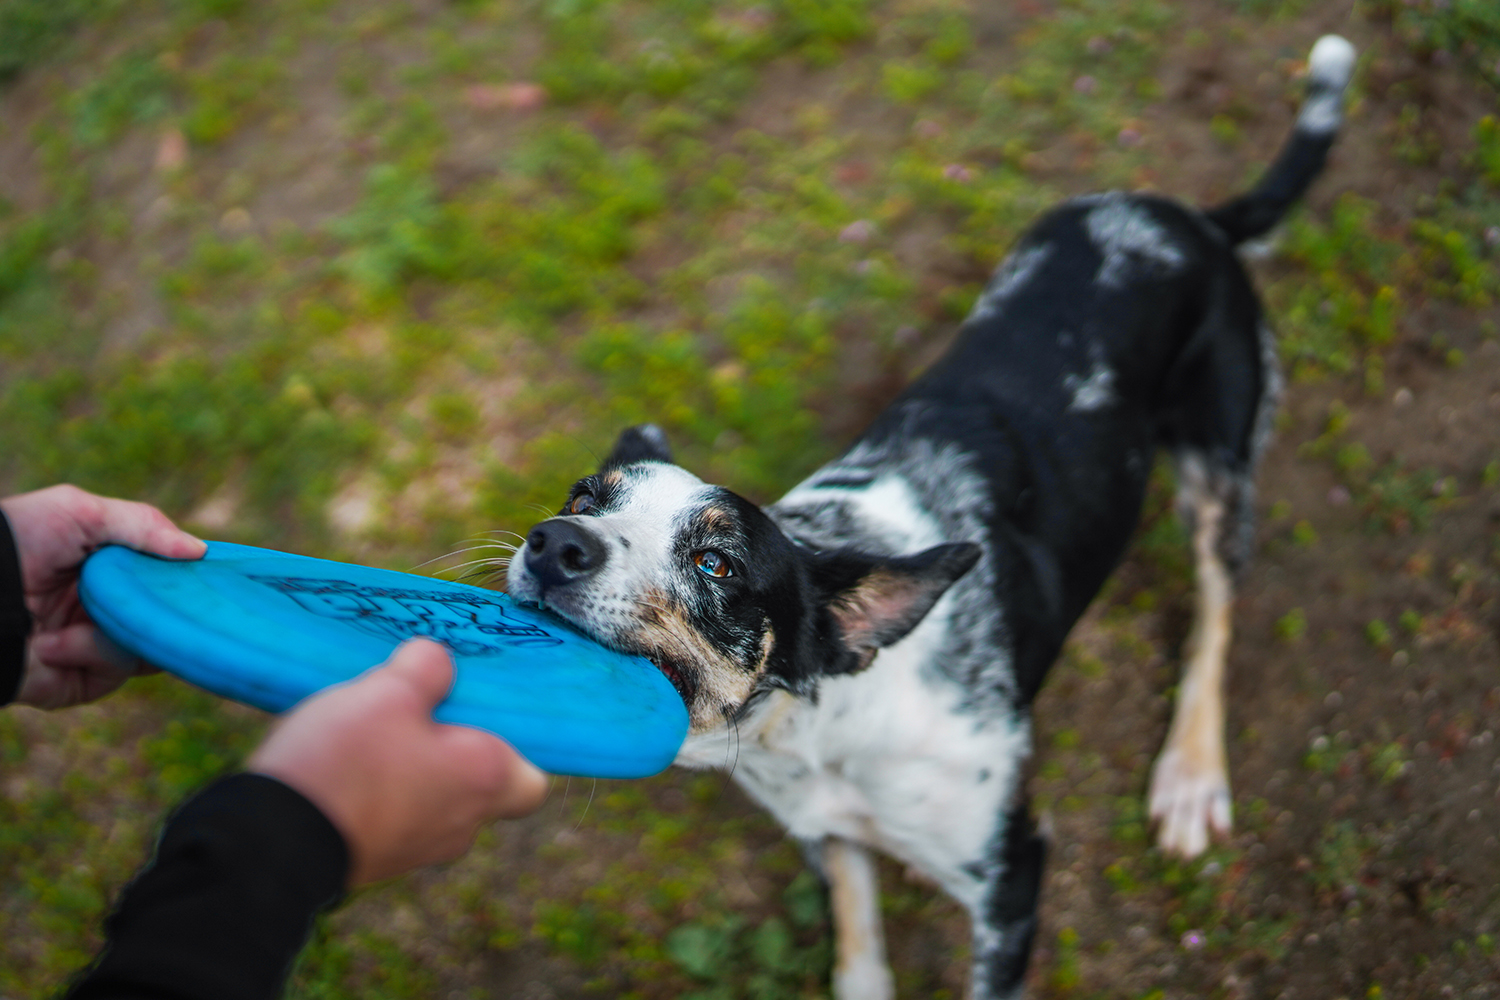 Dog playing tug-of-war with frisbee